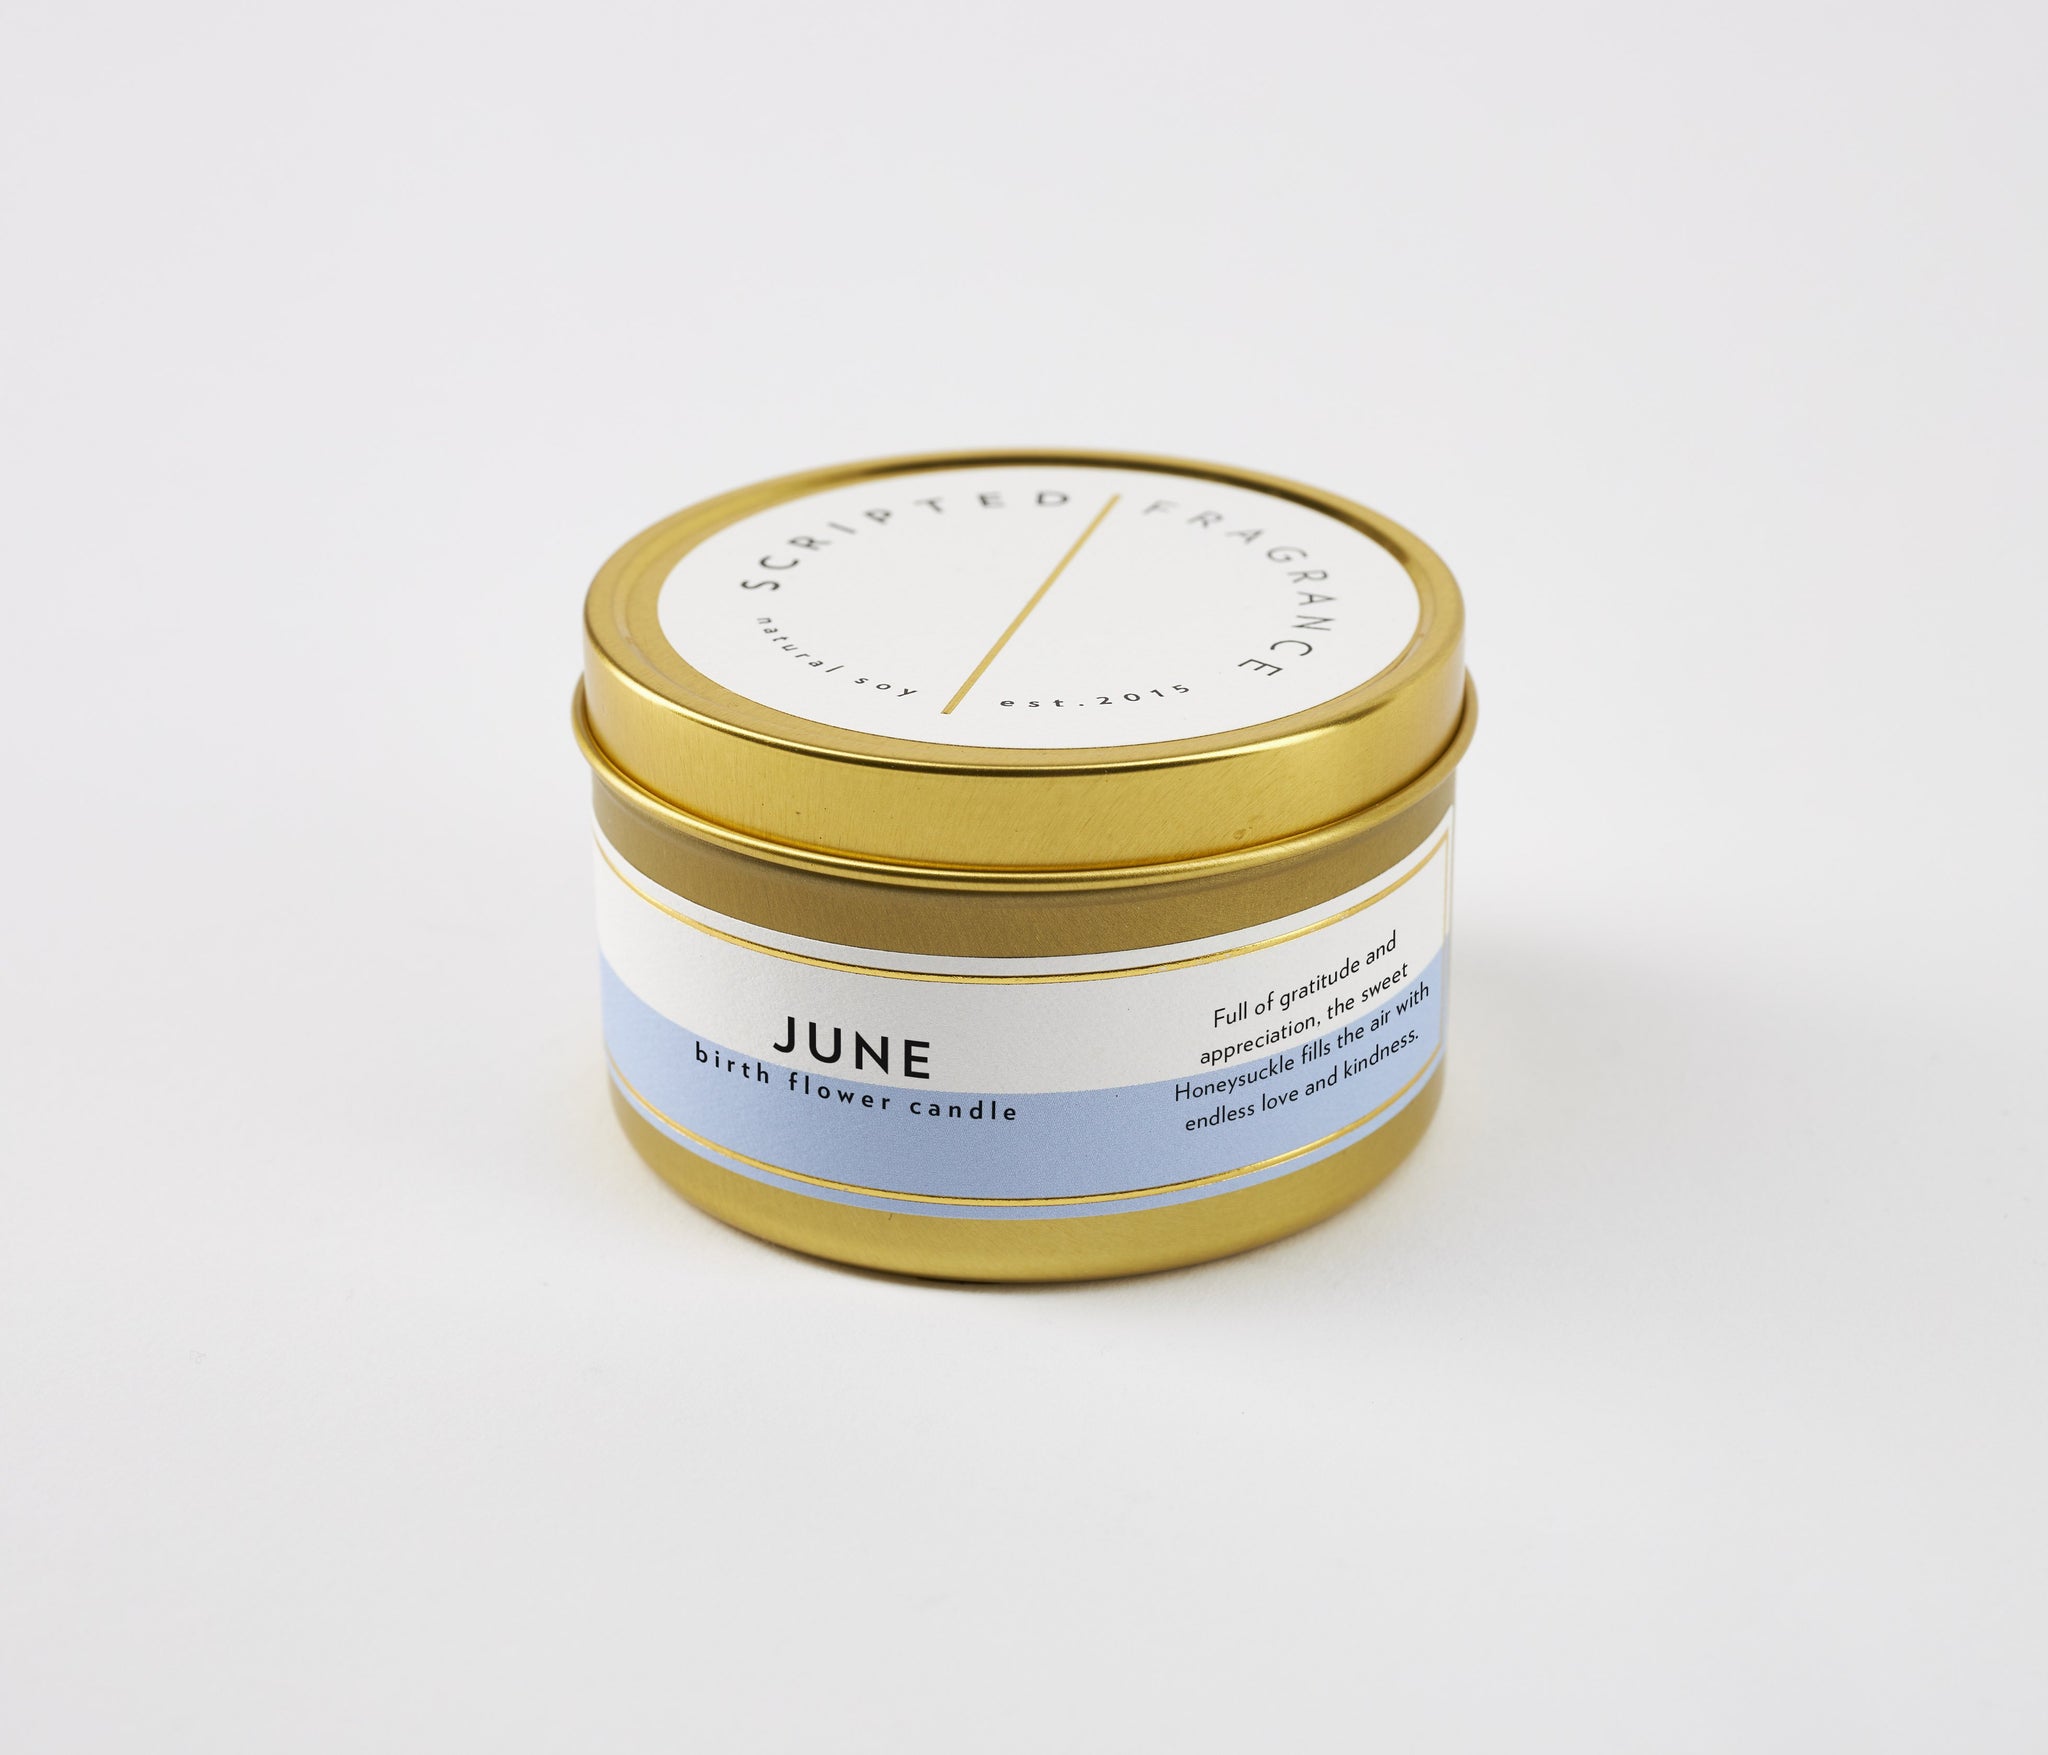 June Birth Month Flower Soy Candle, Honeysuckle Candle